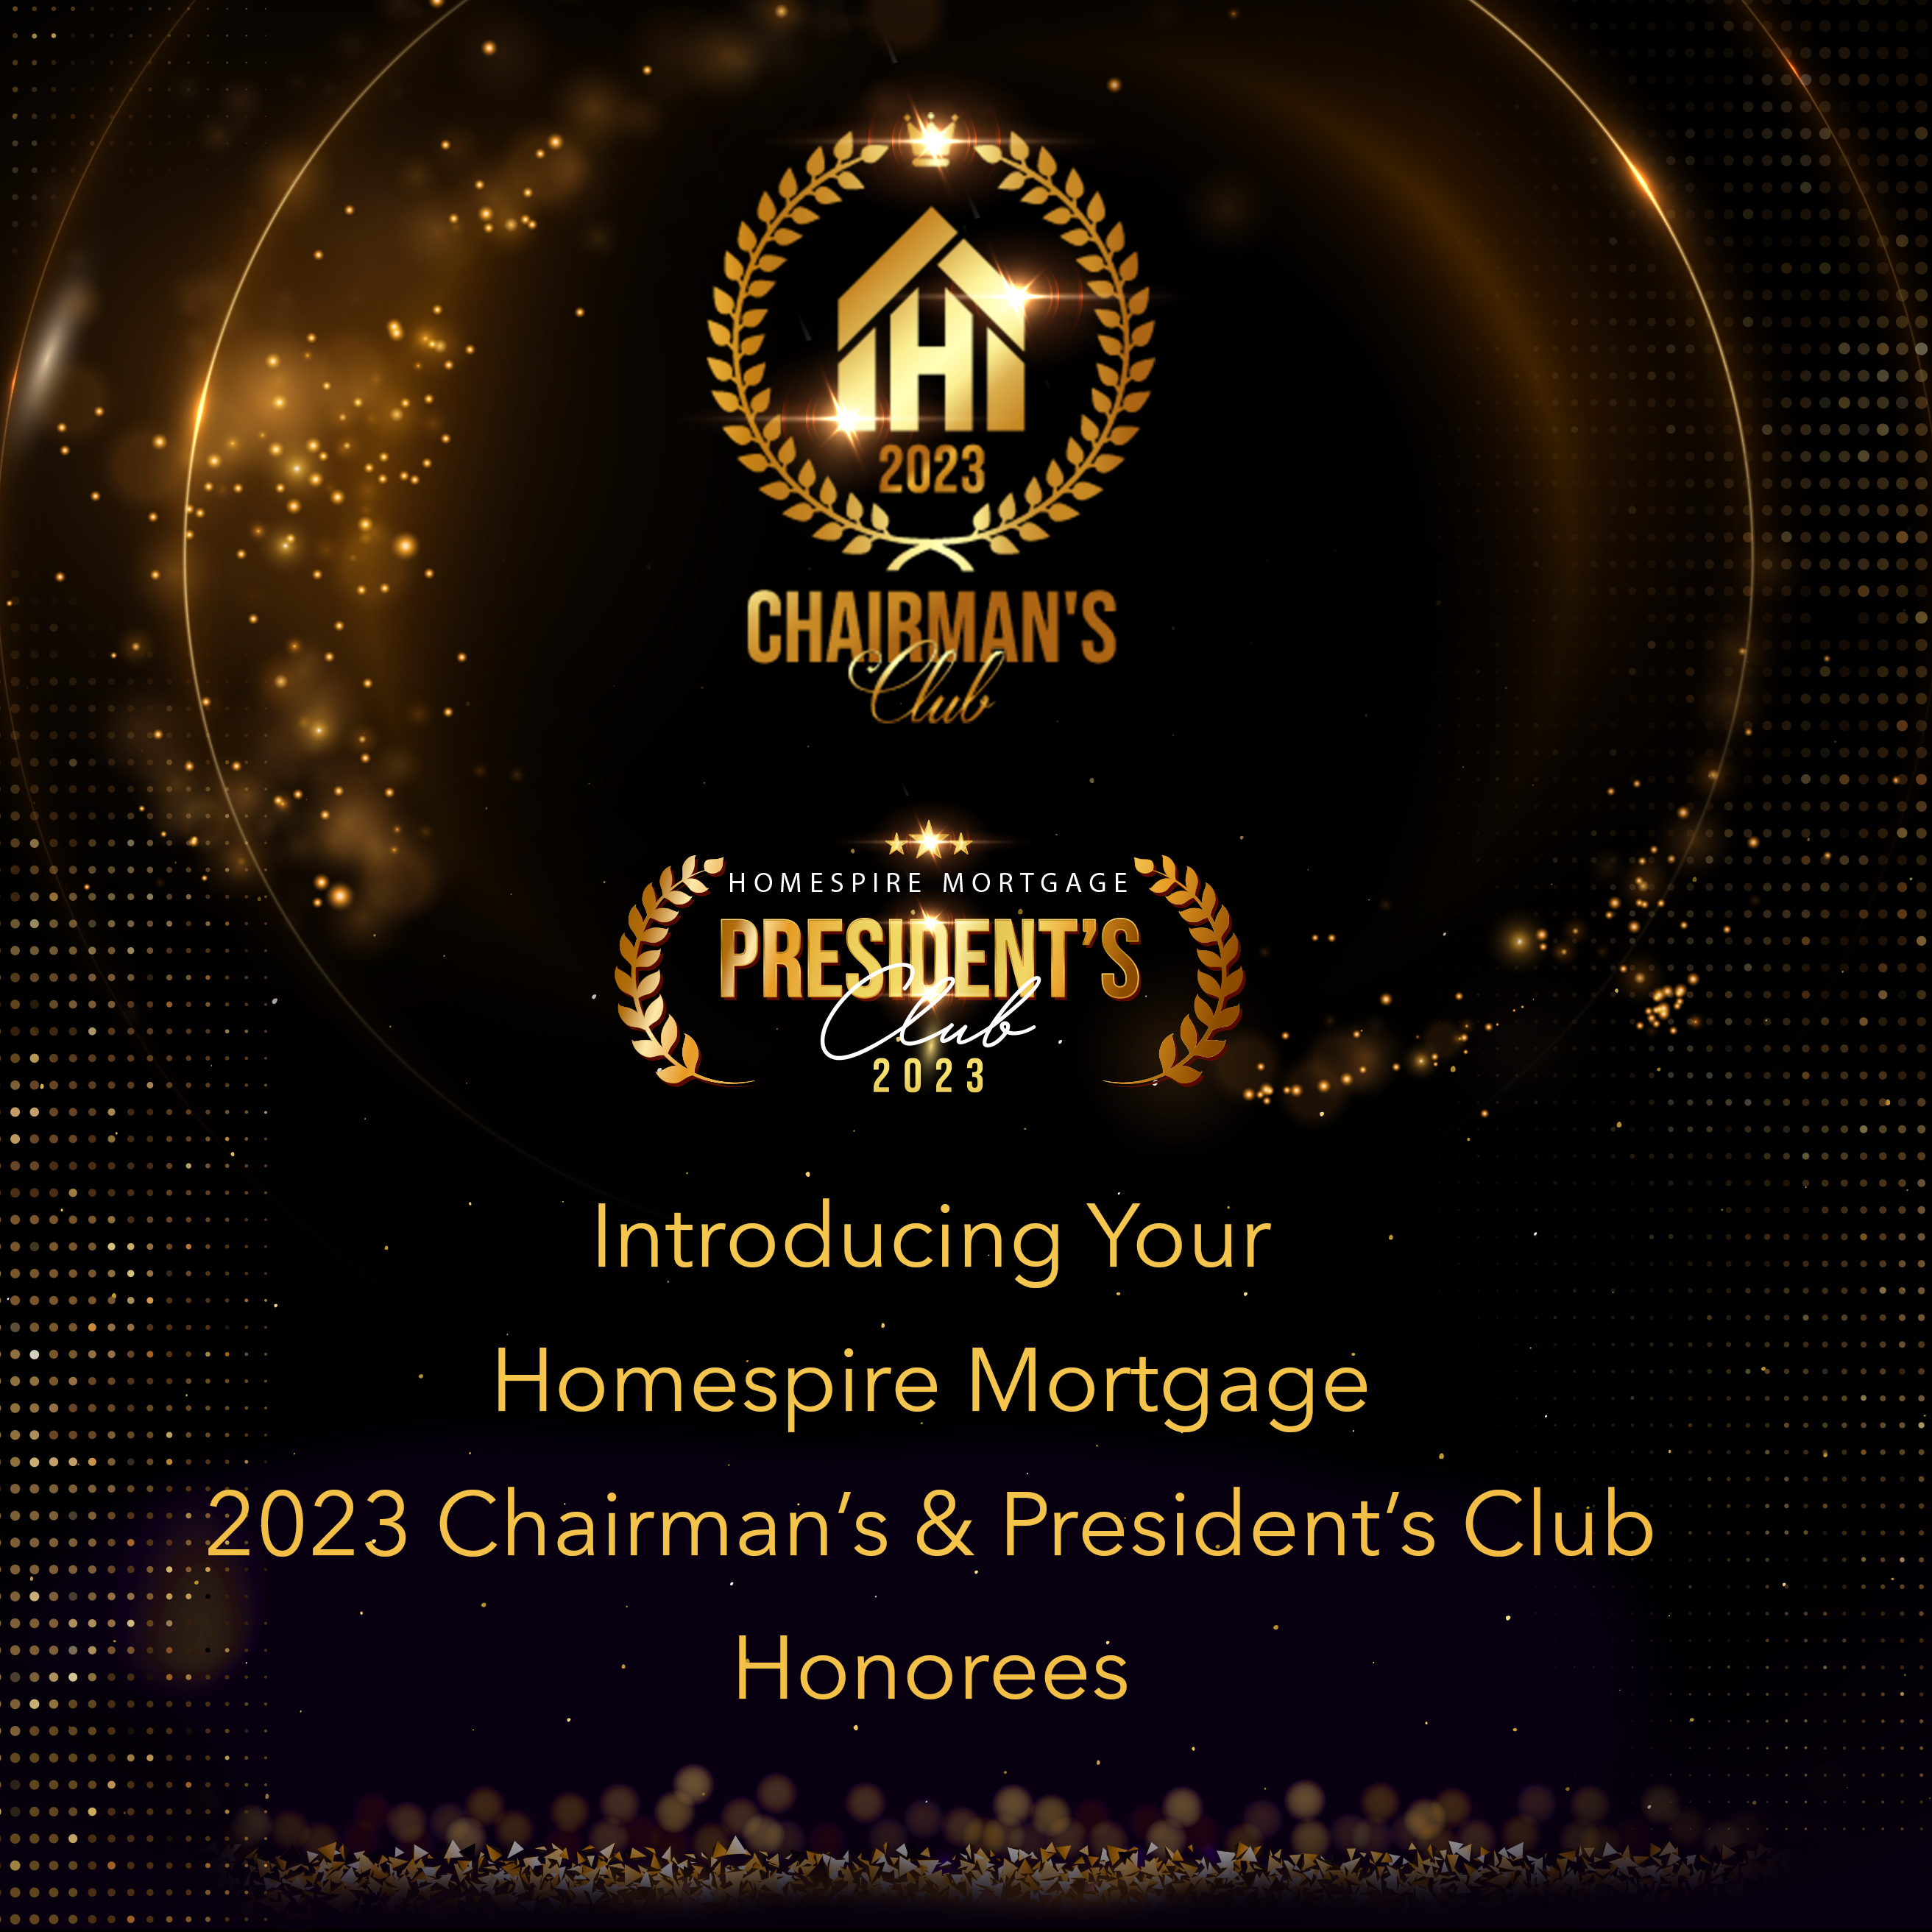 2023 President's Club and Chairman's Club honorees